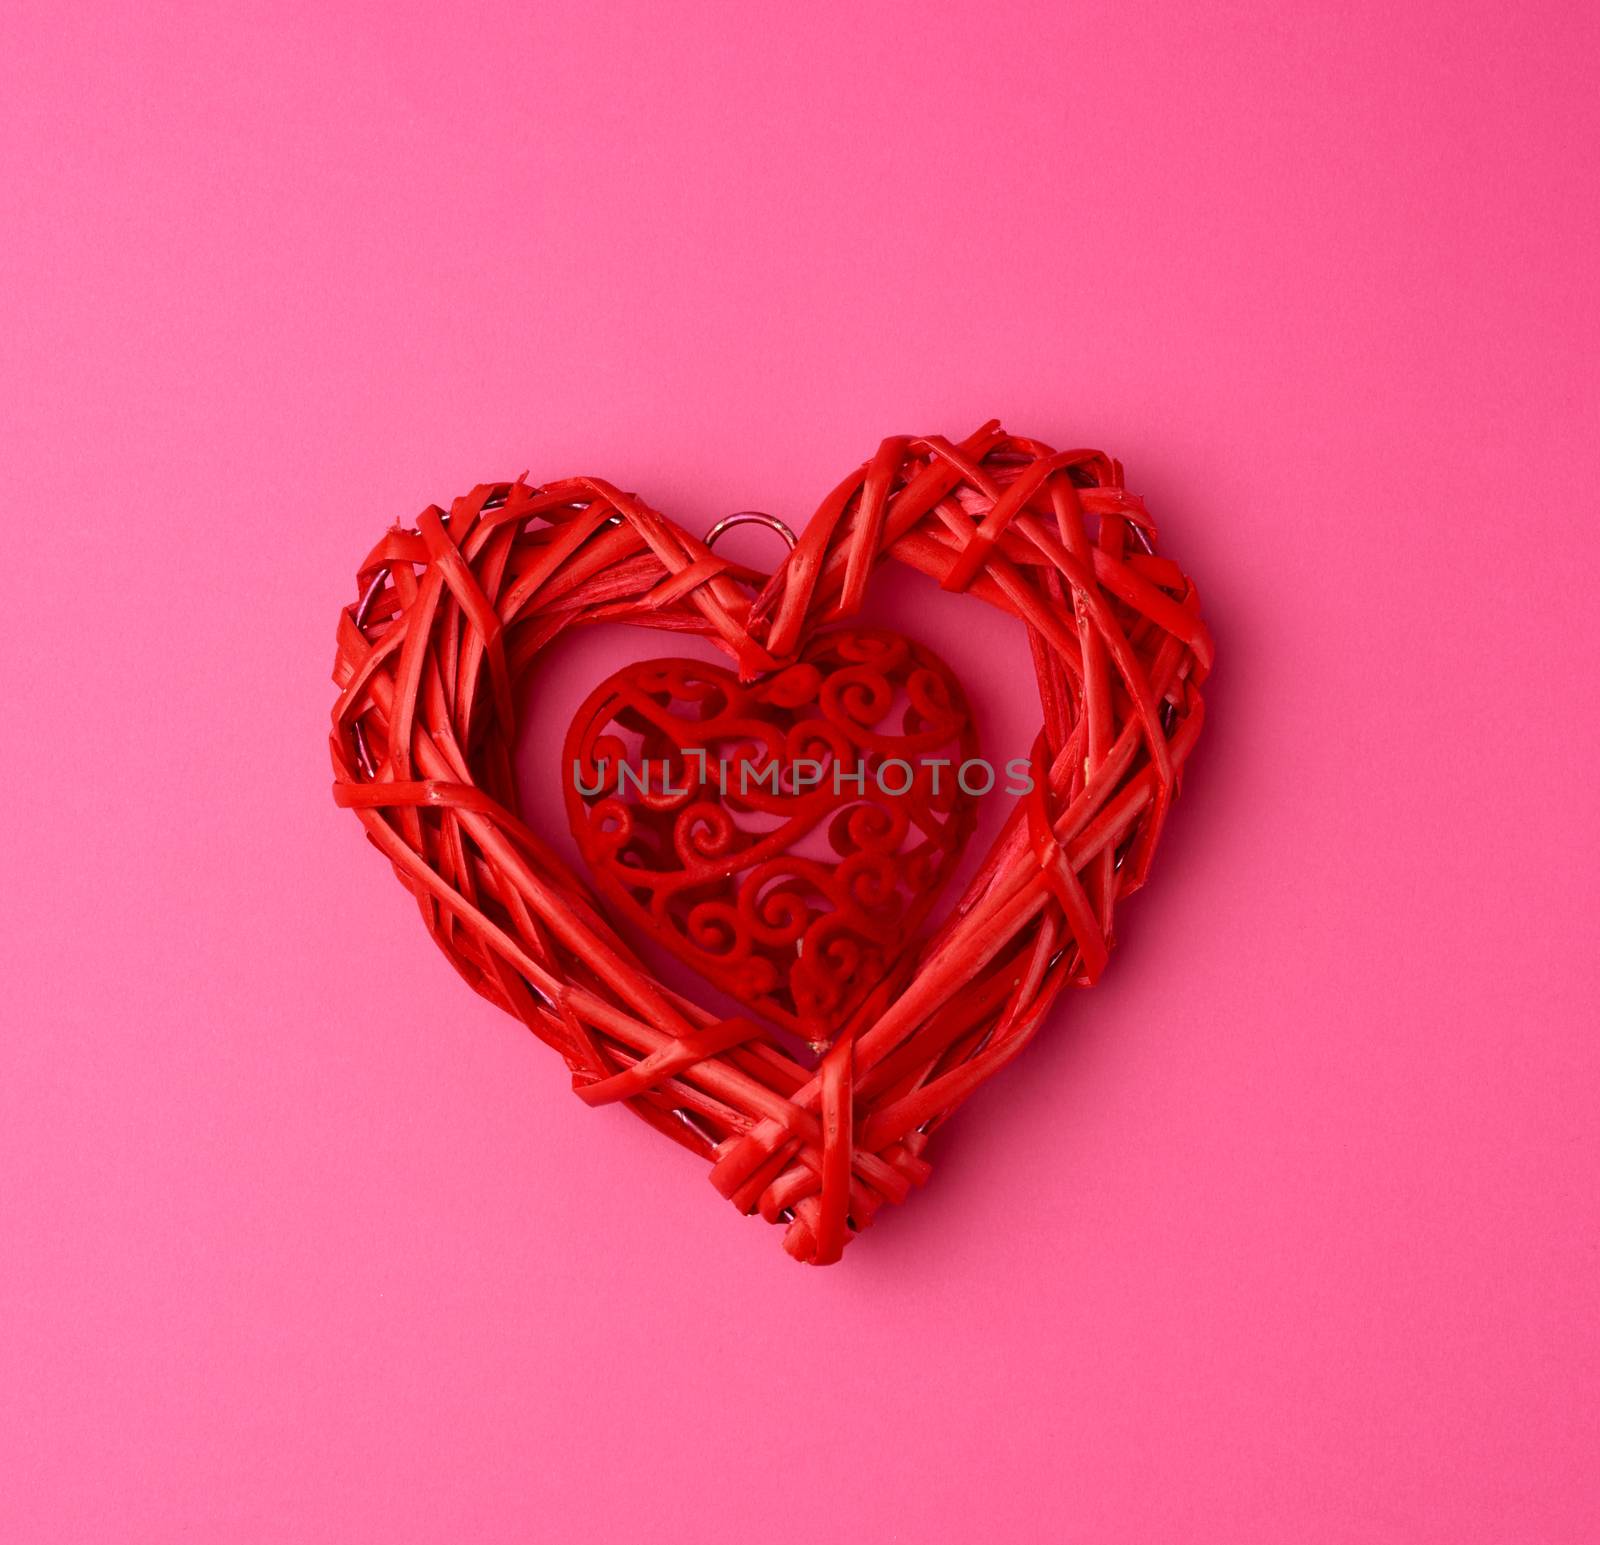 red wicker decorative heart on a pink background, festive backdrop, top view